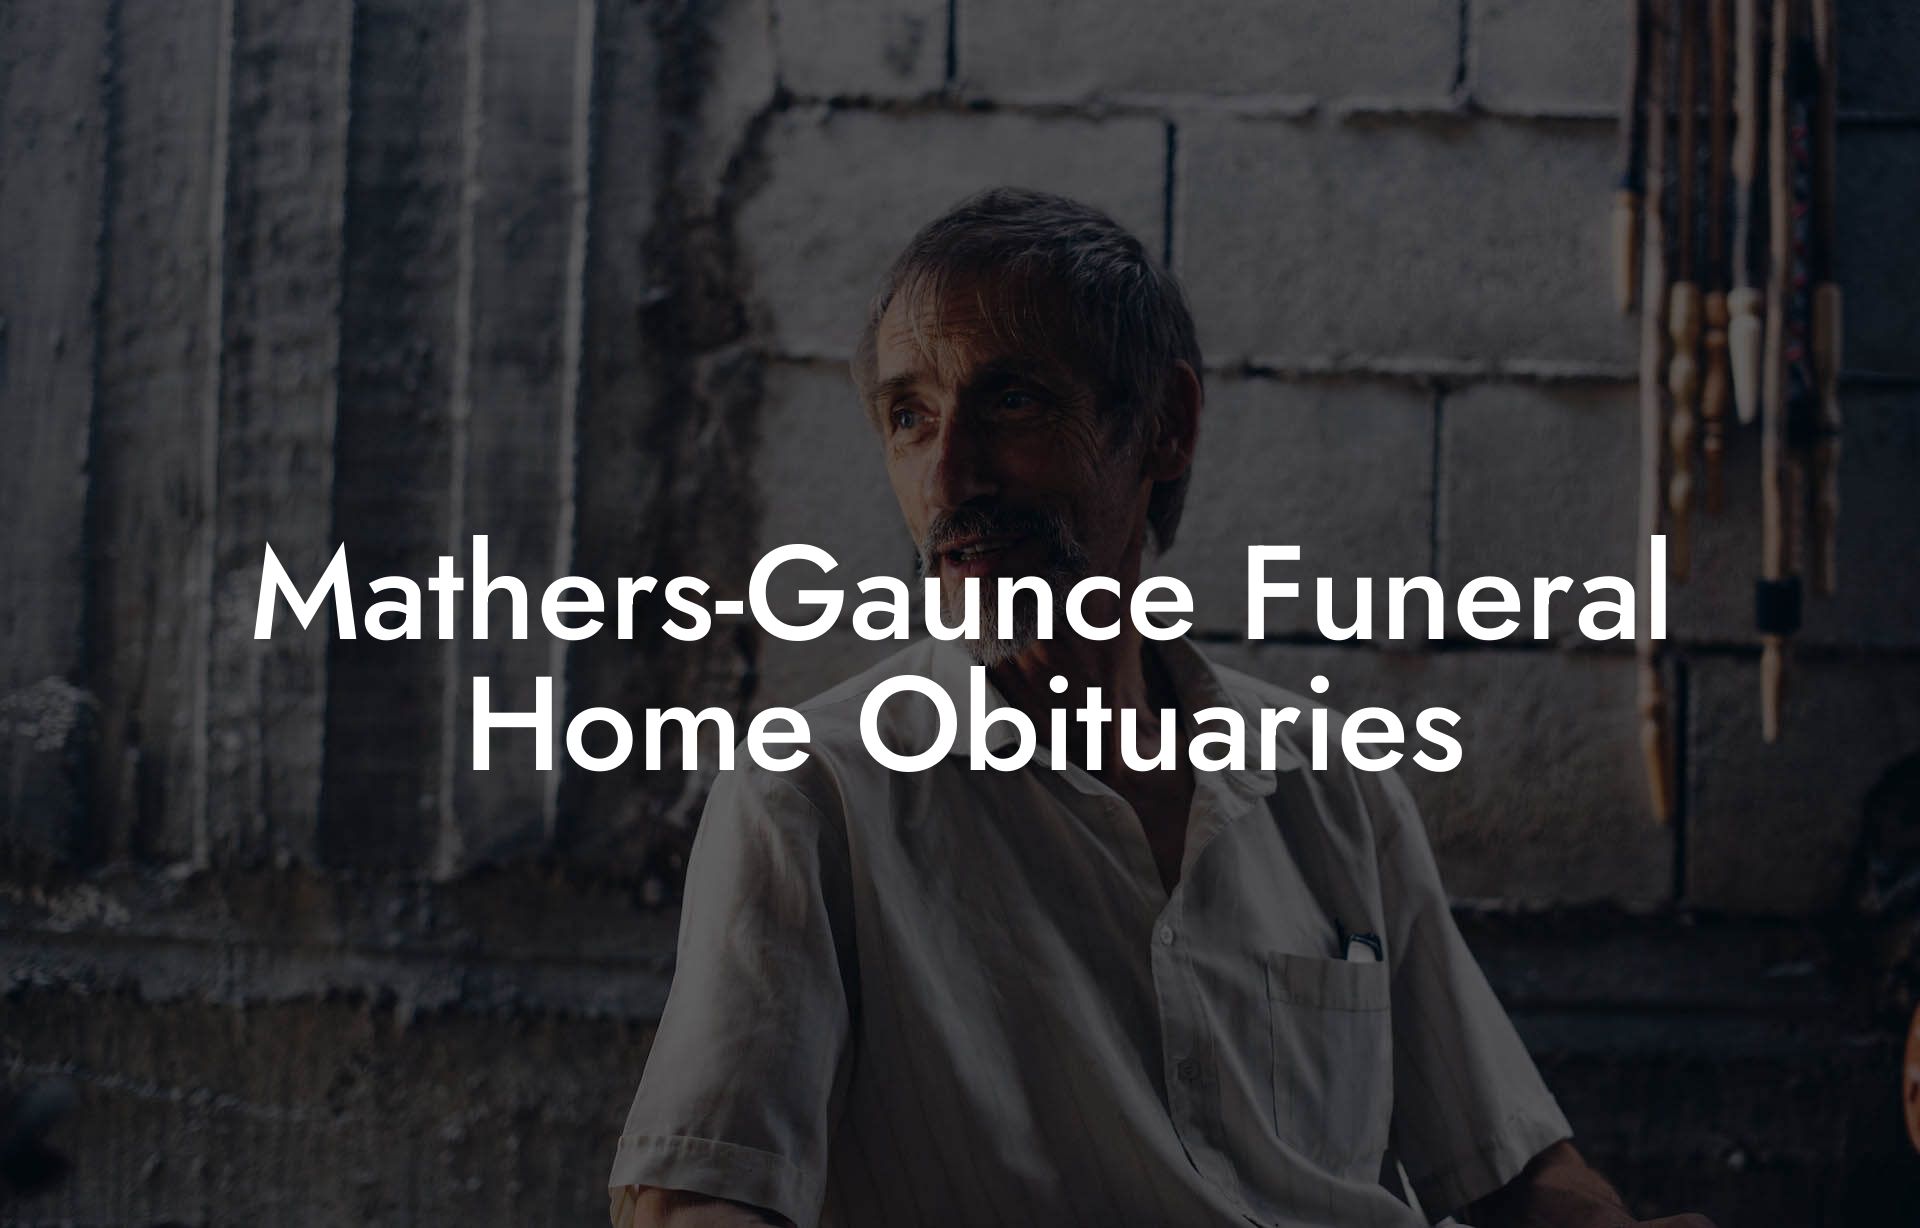 Mathers-Gaunce Funeral Home Obituaries